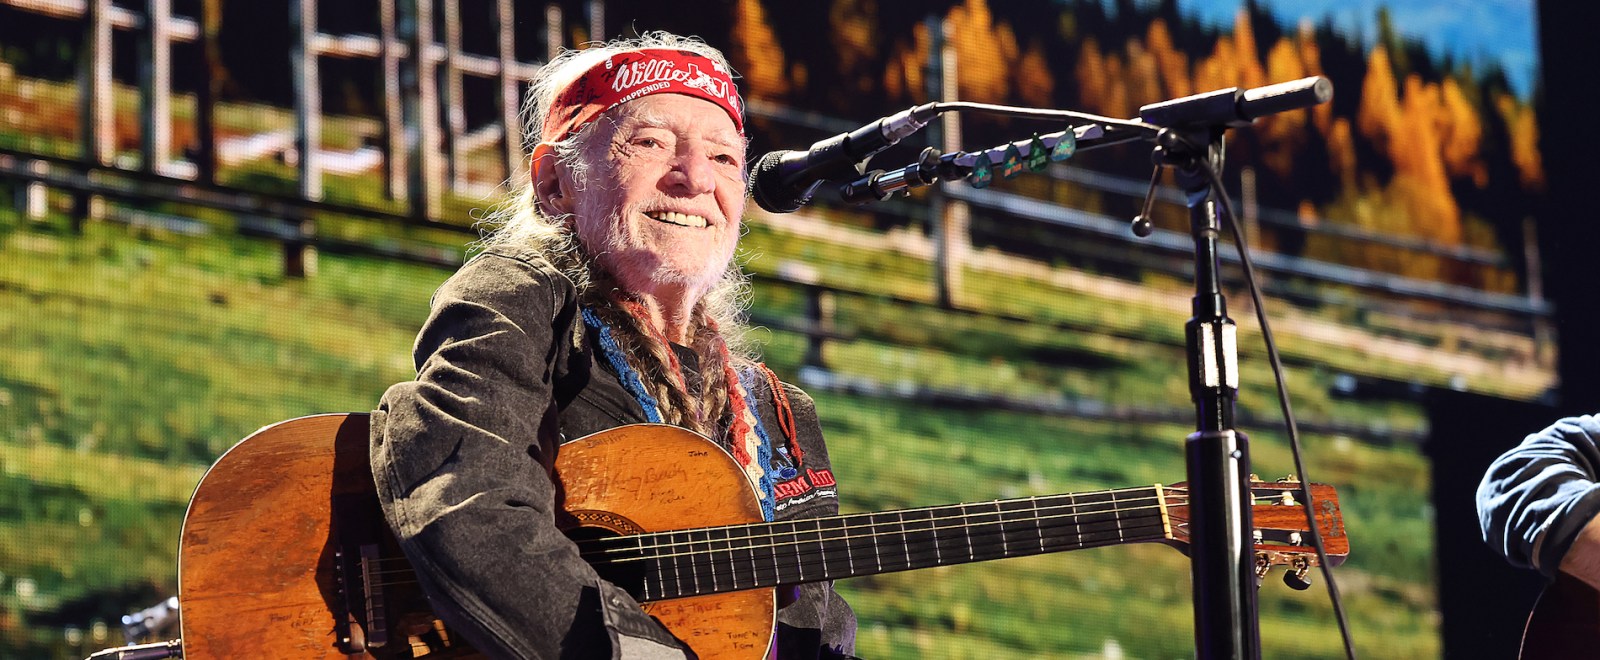 89-Year-Old Willie Nelson Is Up For 2023 Grammys, Not Oldest Nominee